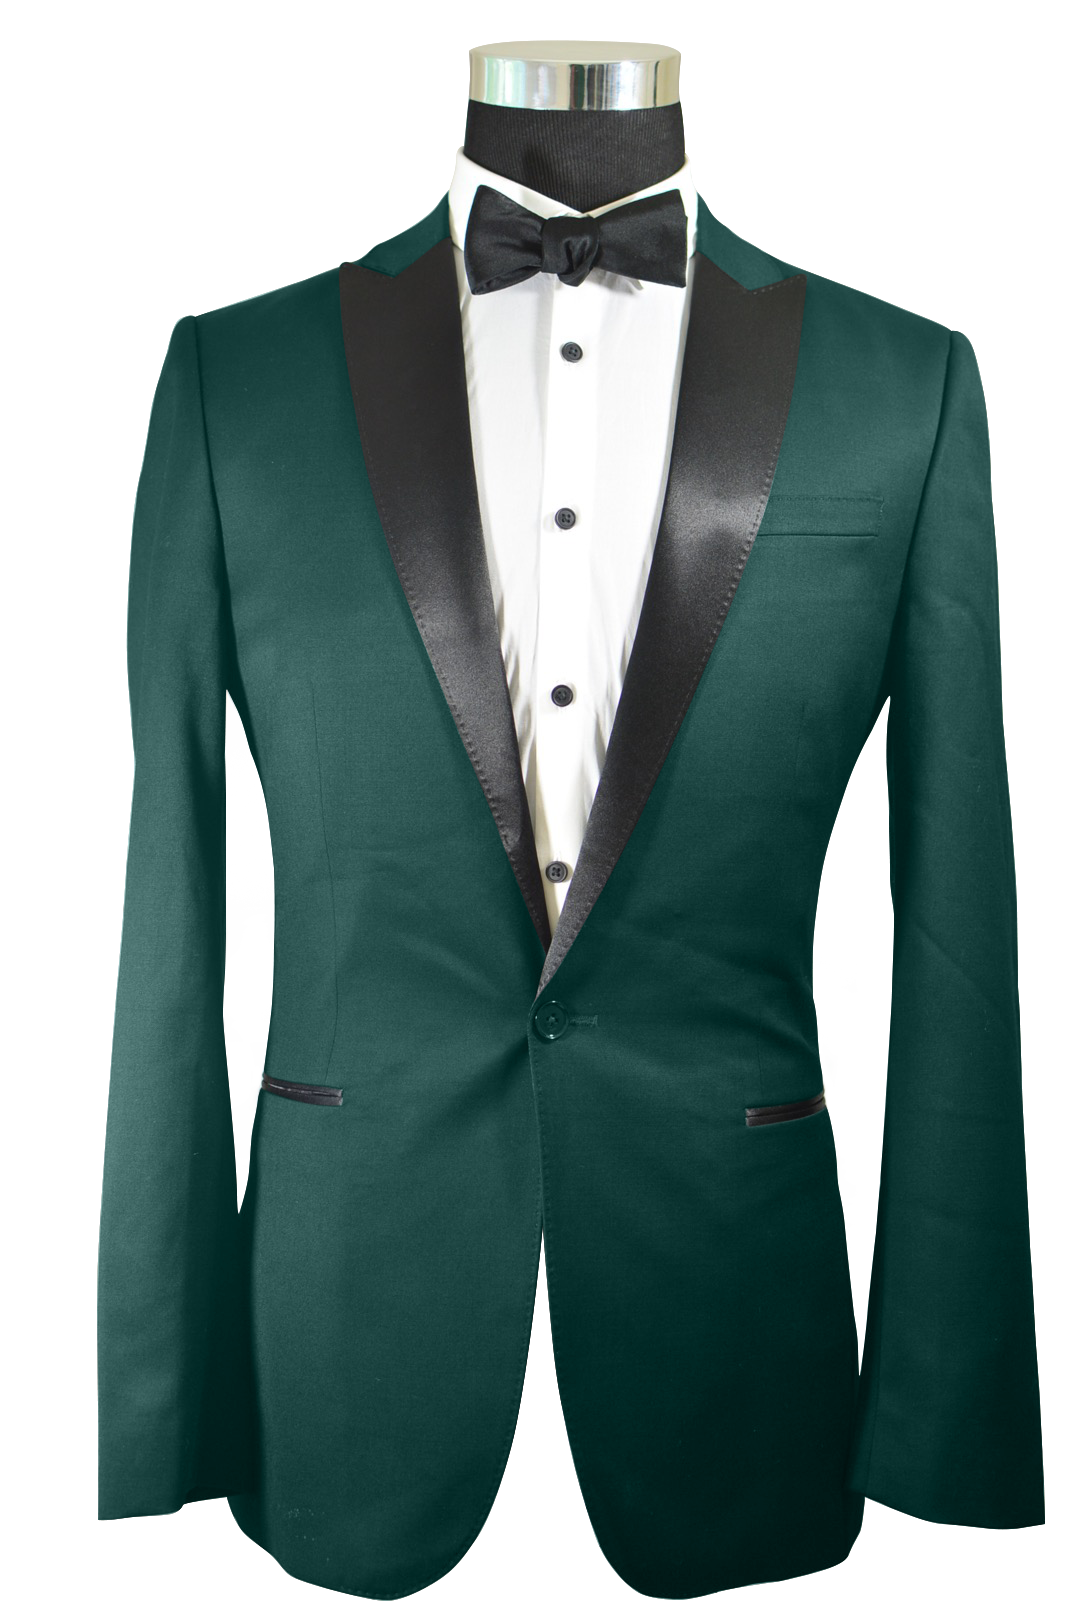 The Regal Forest Green Tuxedo - Legacy Lapels